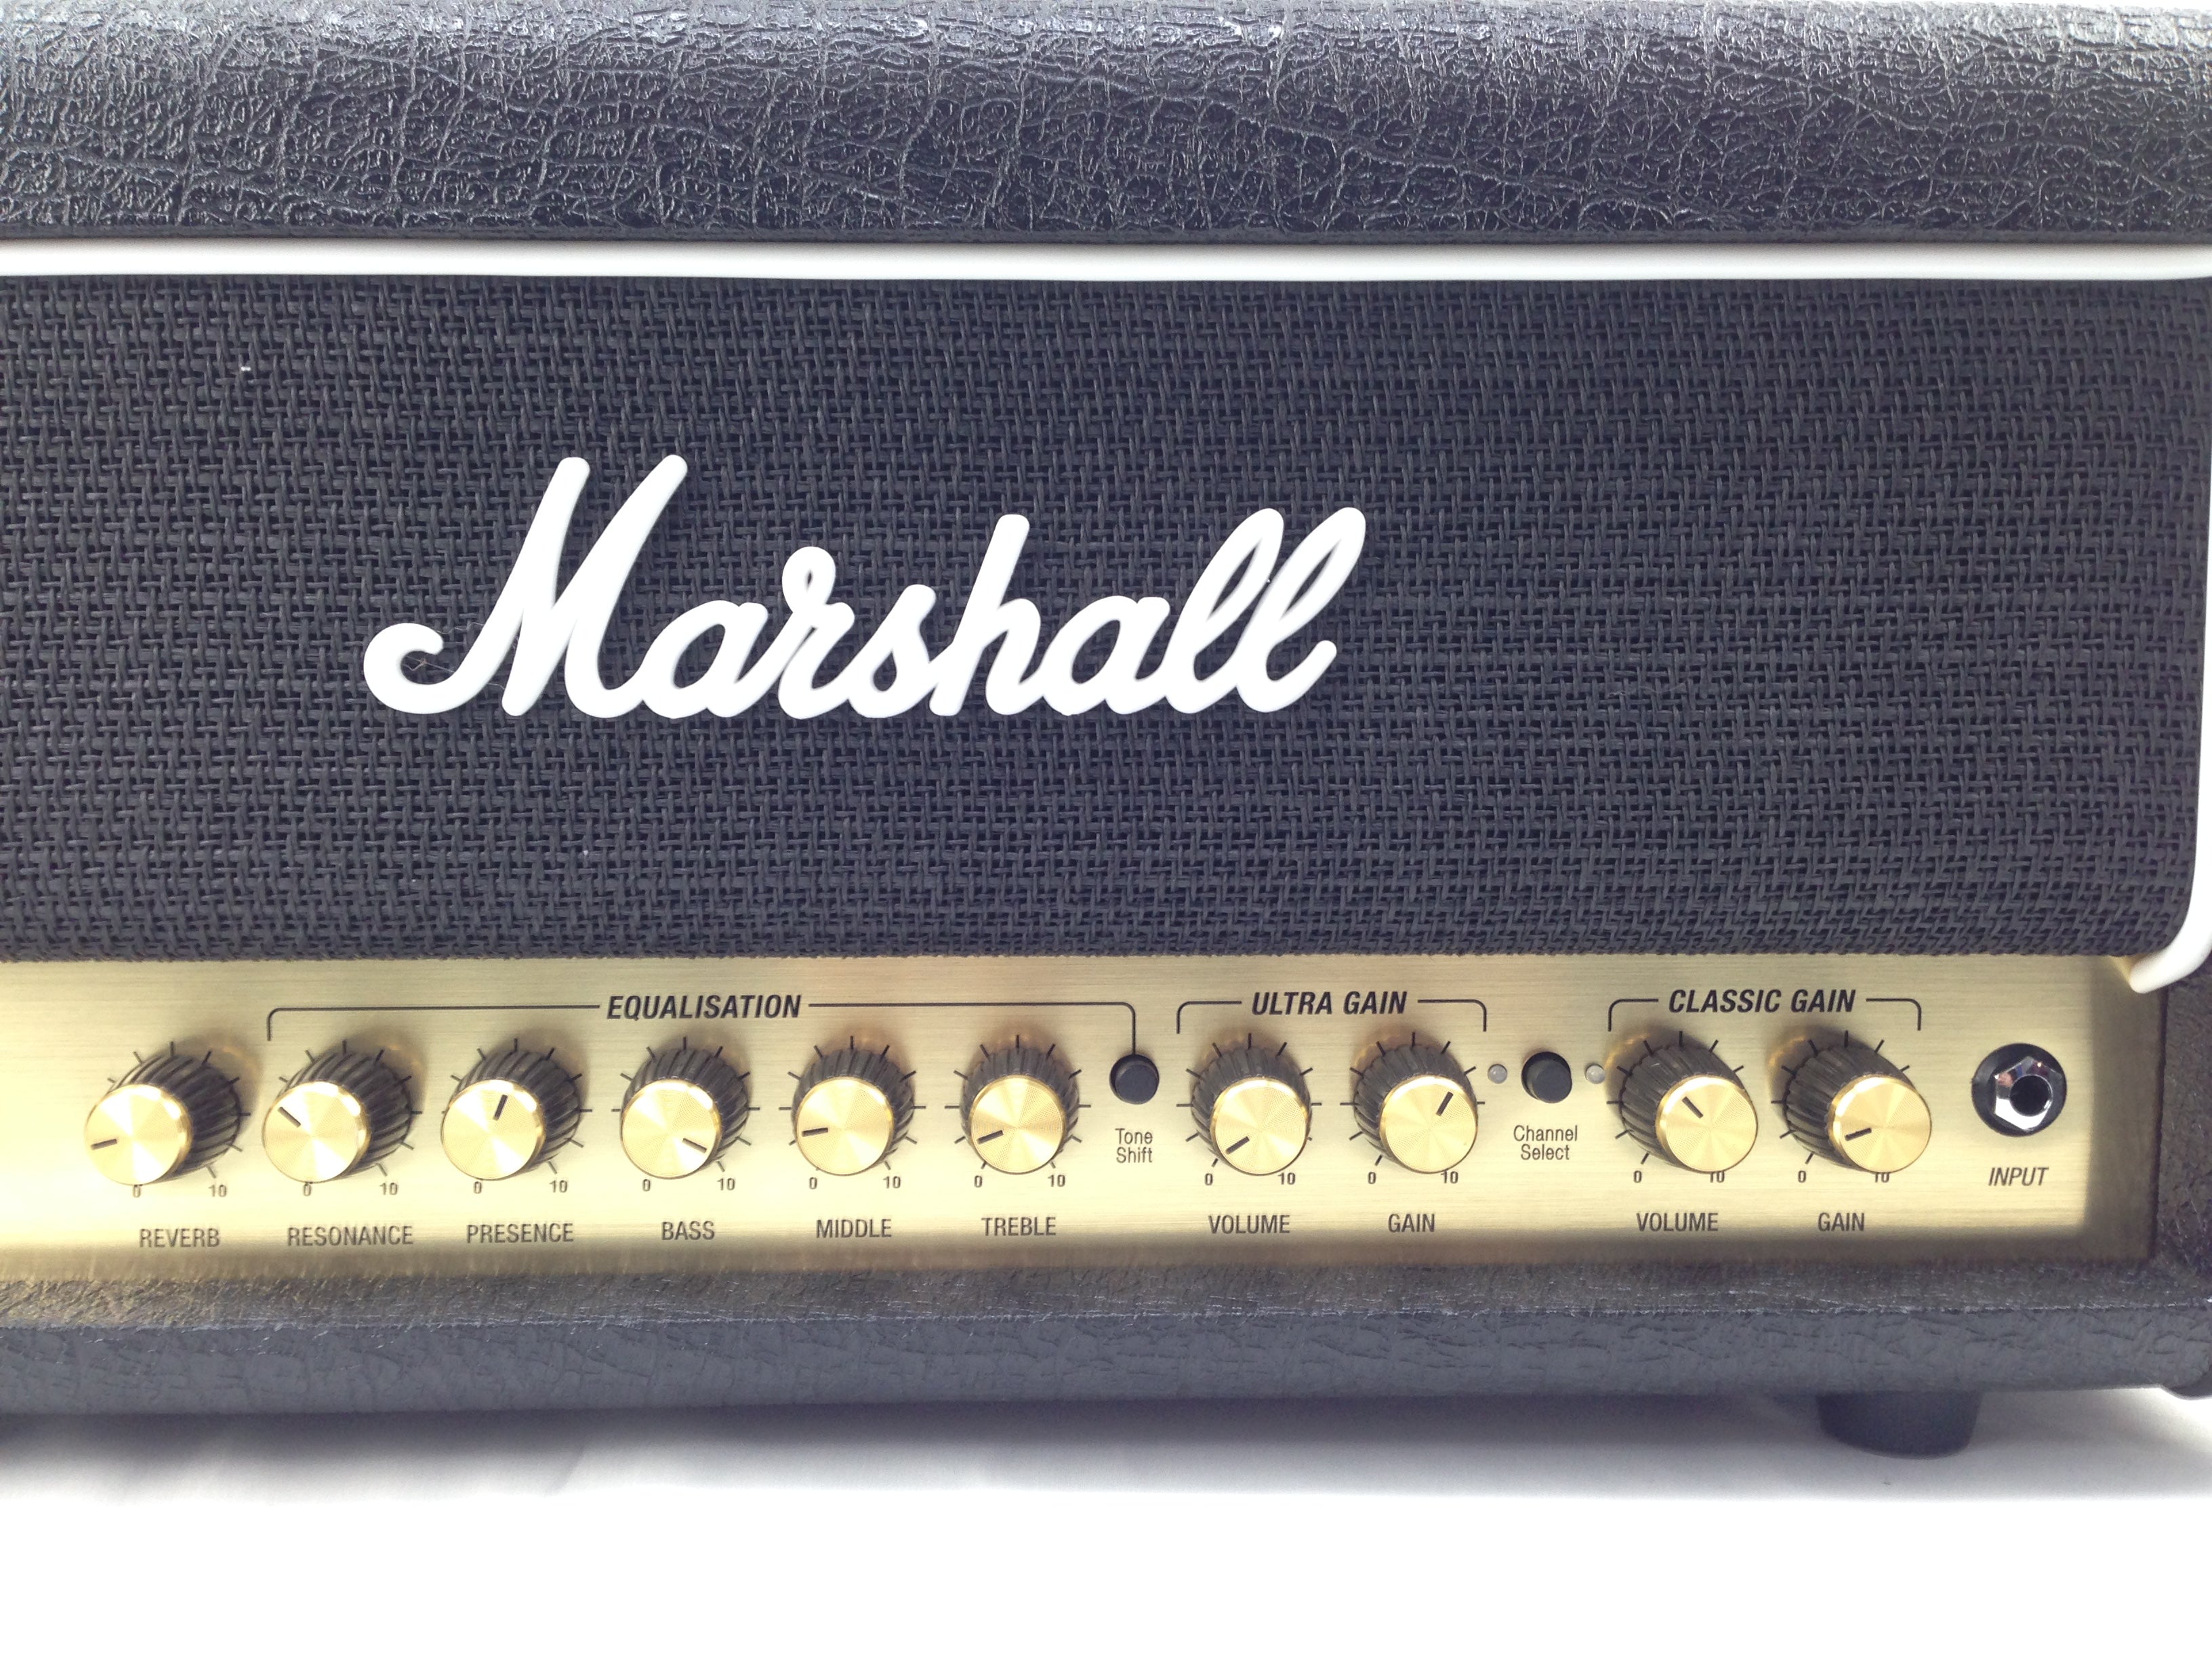 Marshall DSL20HR 20-Watt Guitar Amp Head w/ PEDL-90012 Footswitch Included